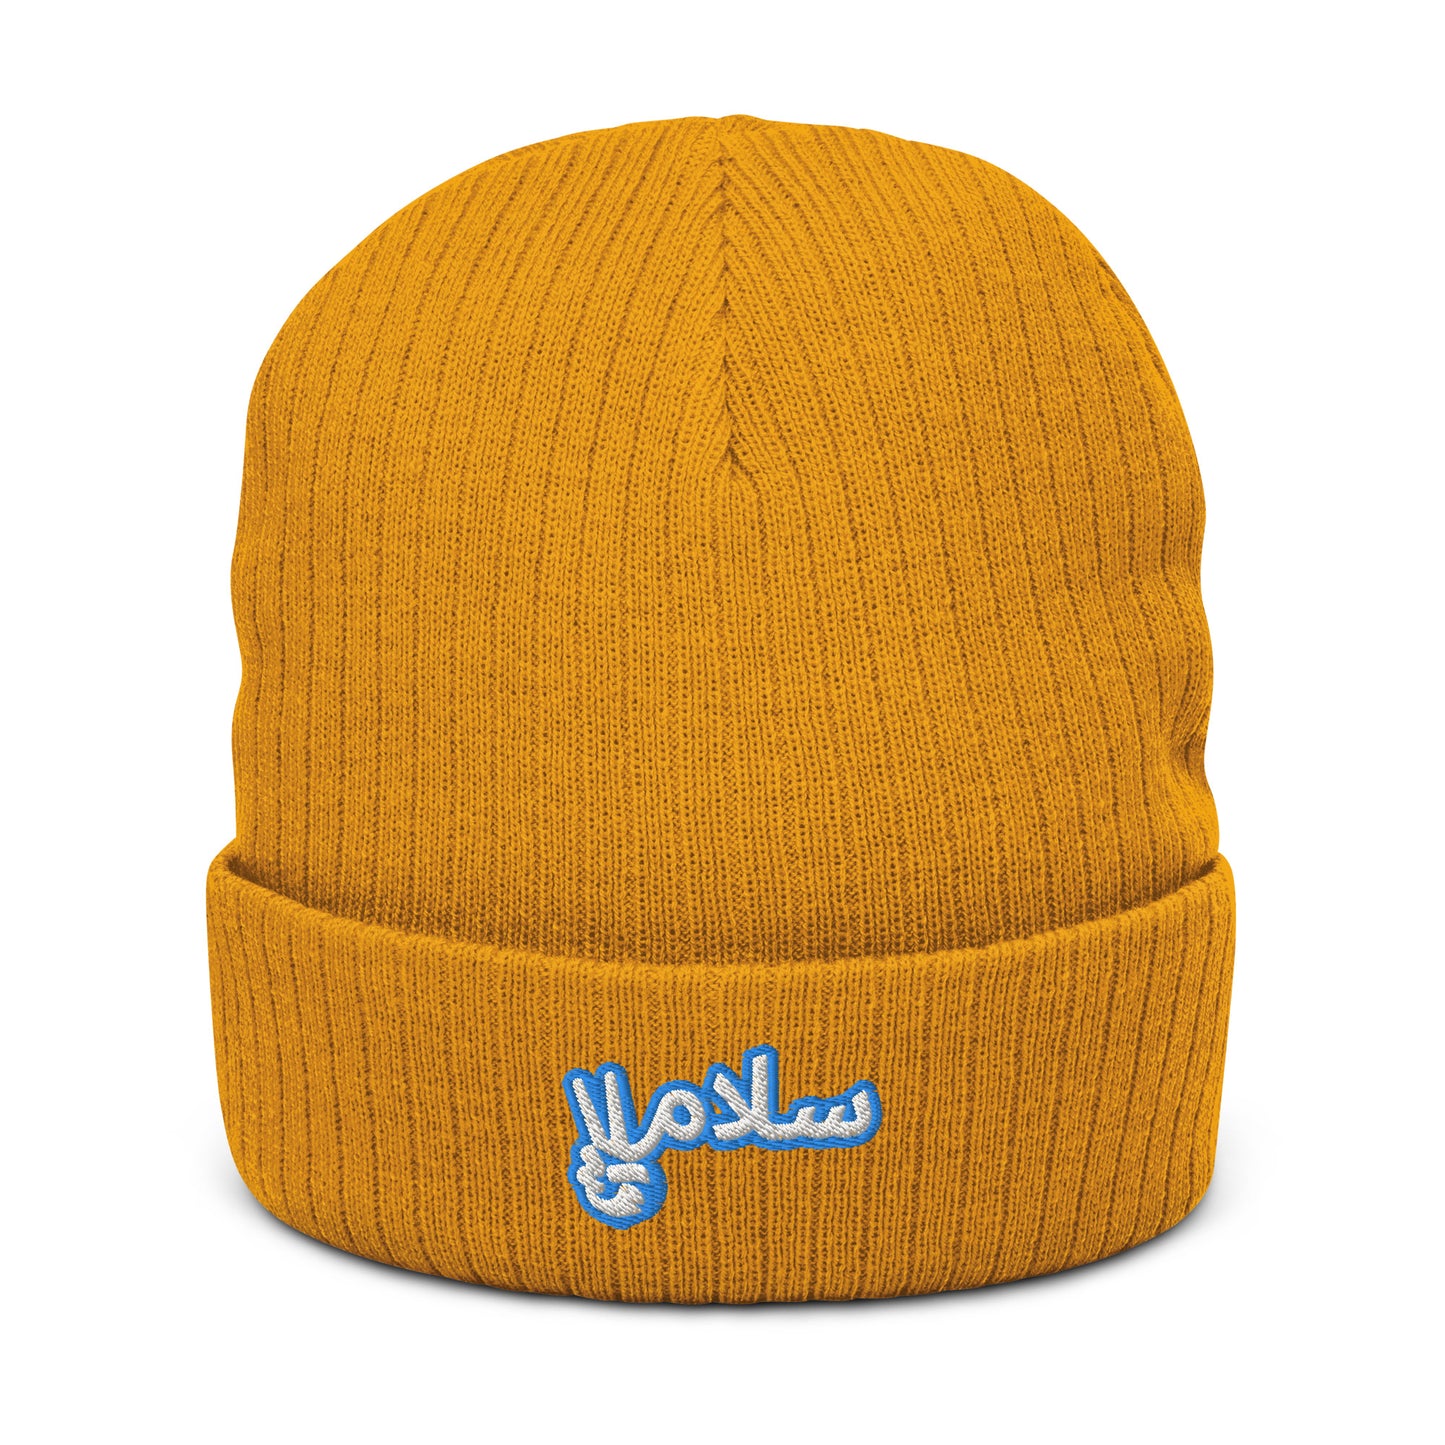 Salaam! | Ribbed Knit Beanie with Embroidered Emblem Teal